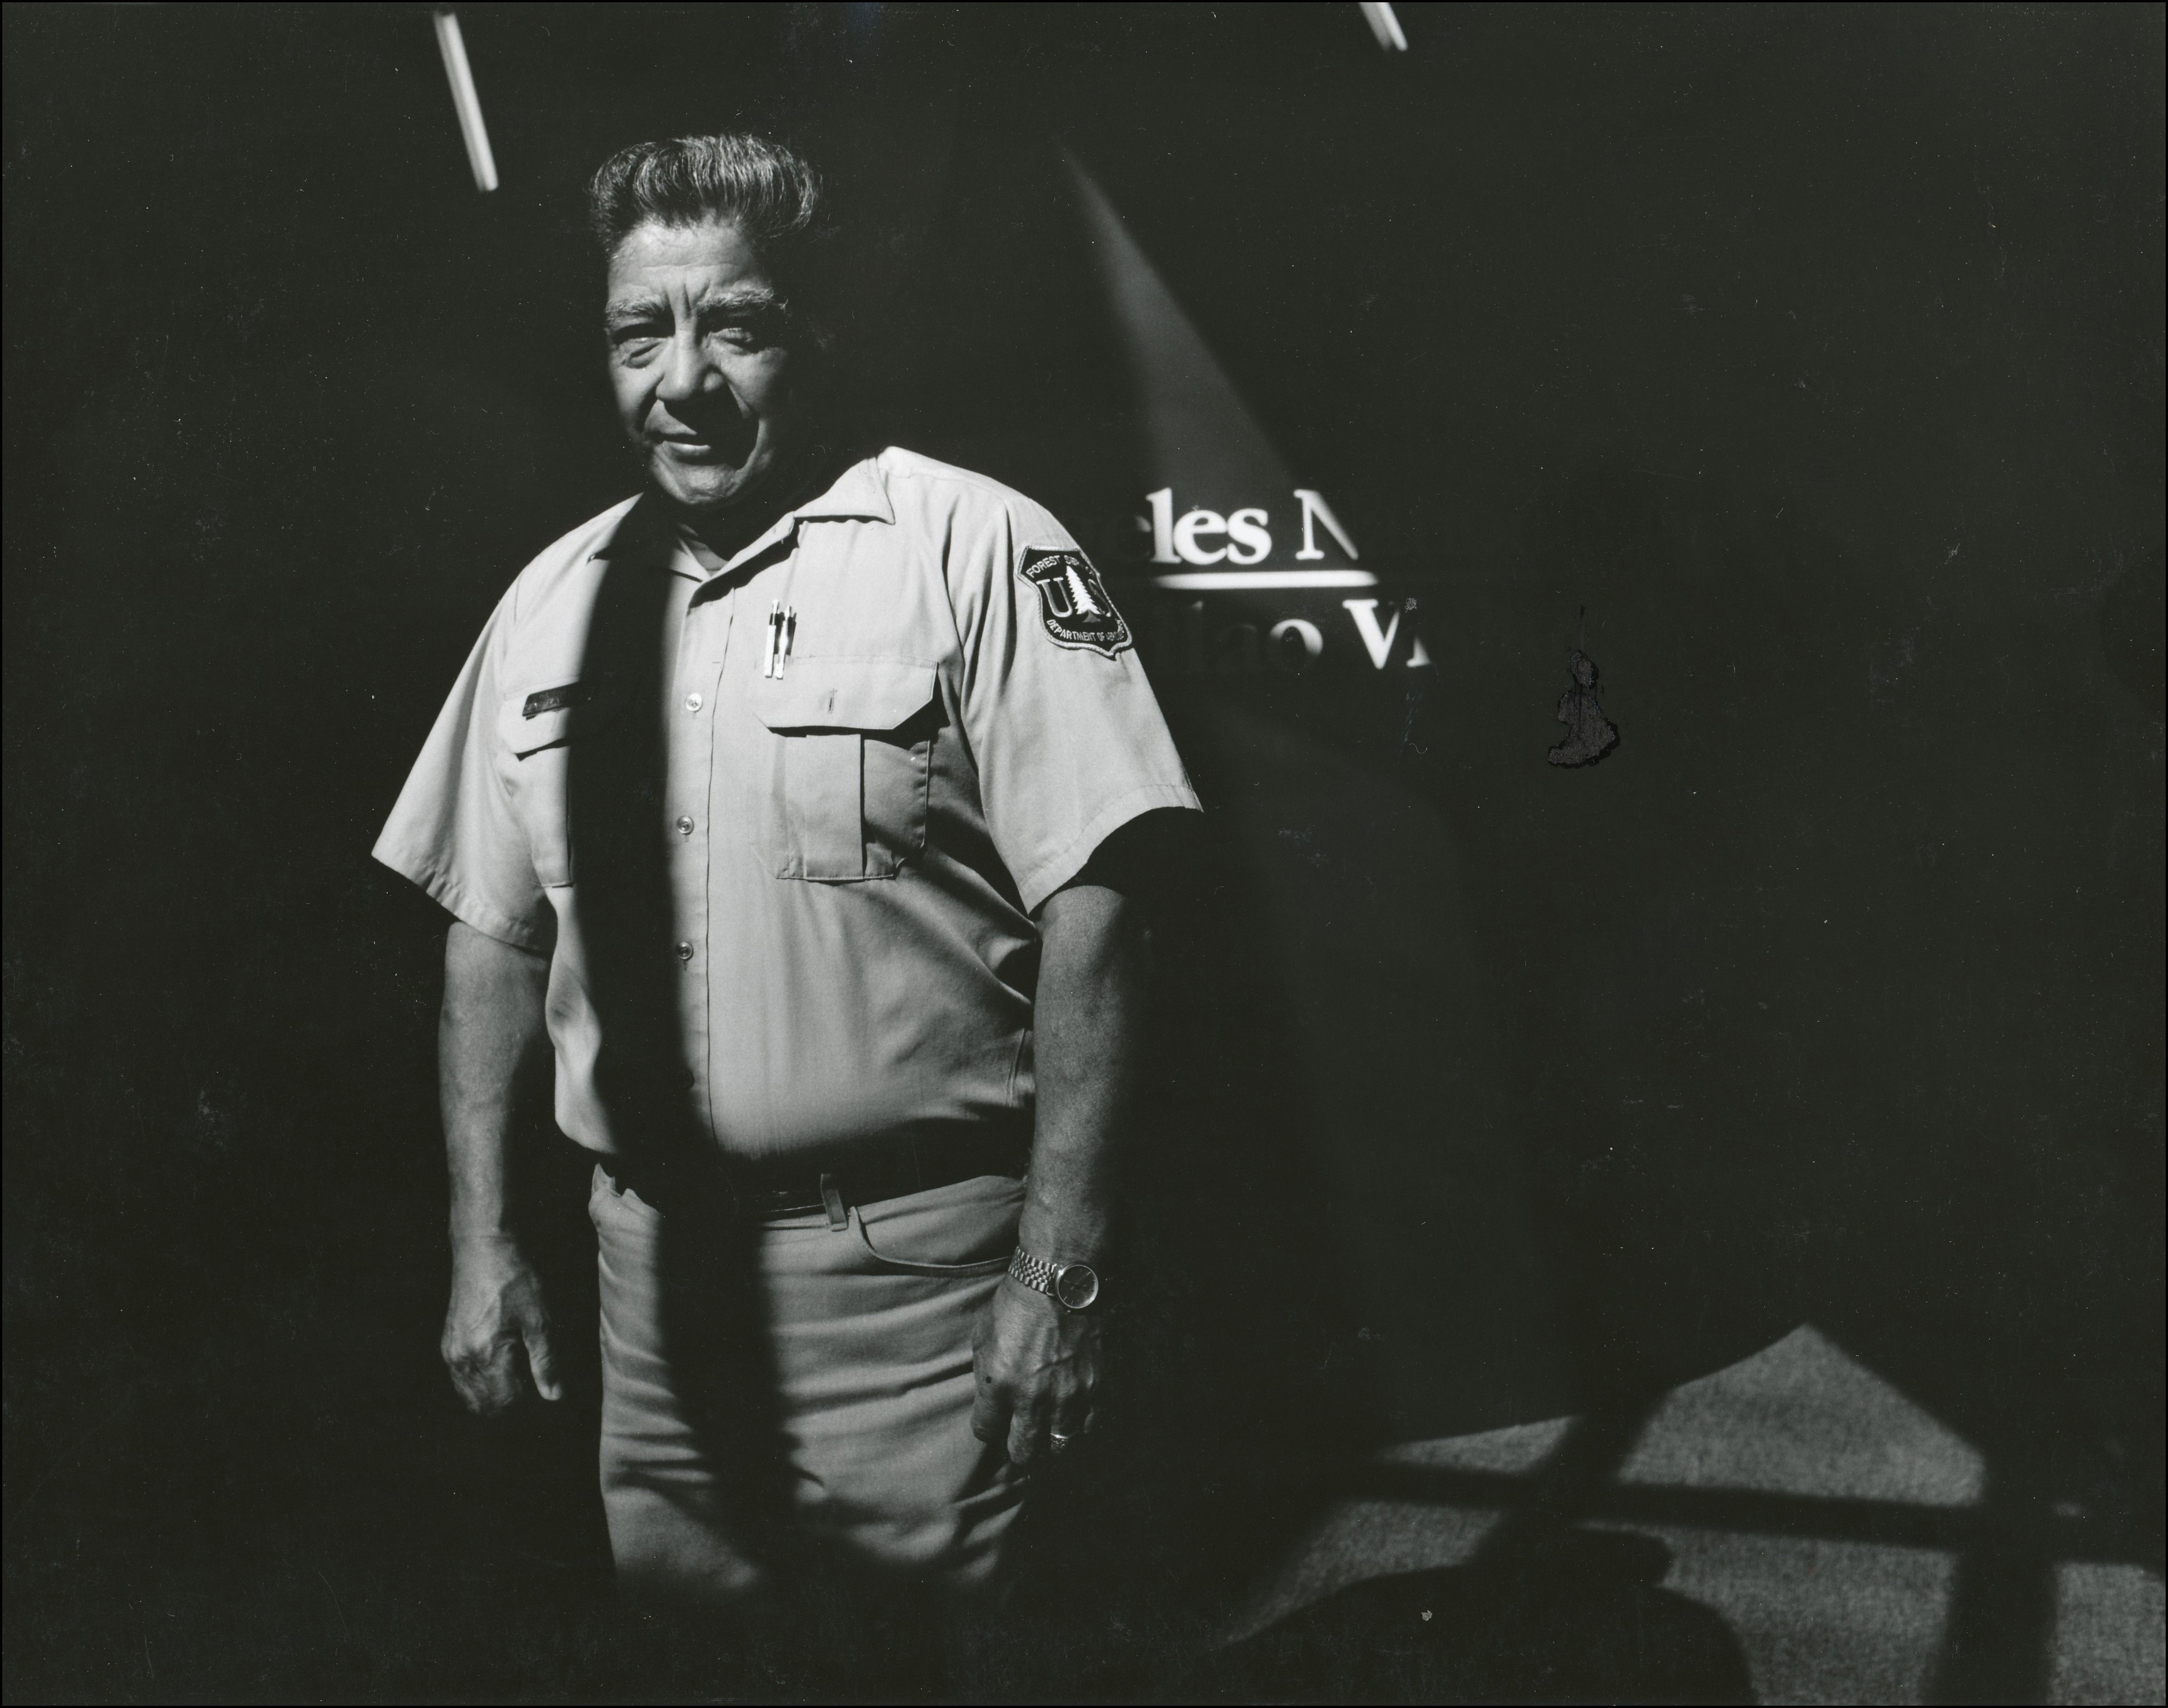 Forest service worker in uniform posing inside a dark building with sunlight coming in from a source above